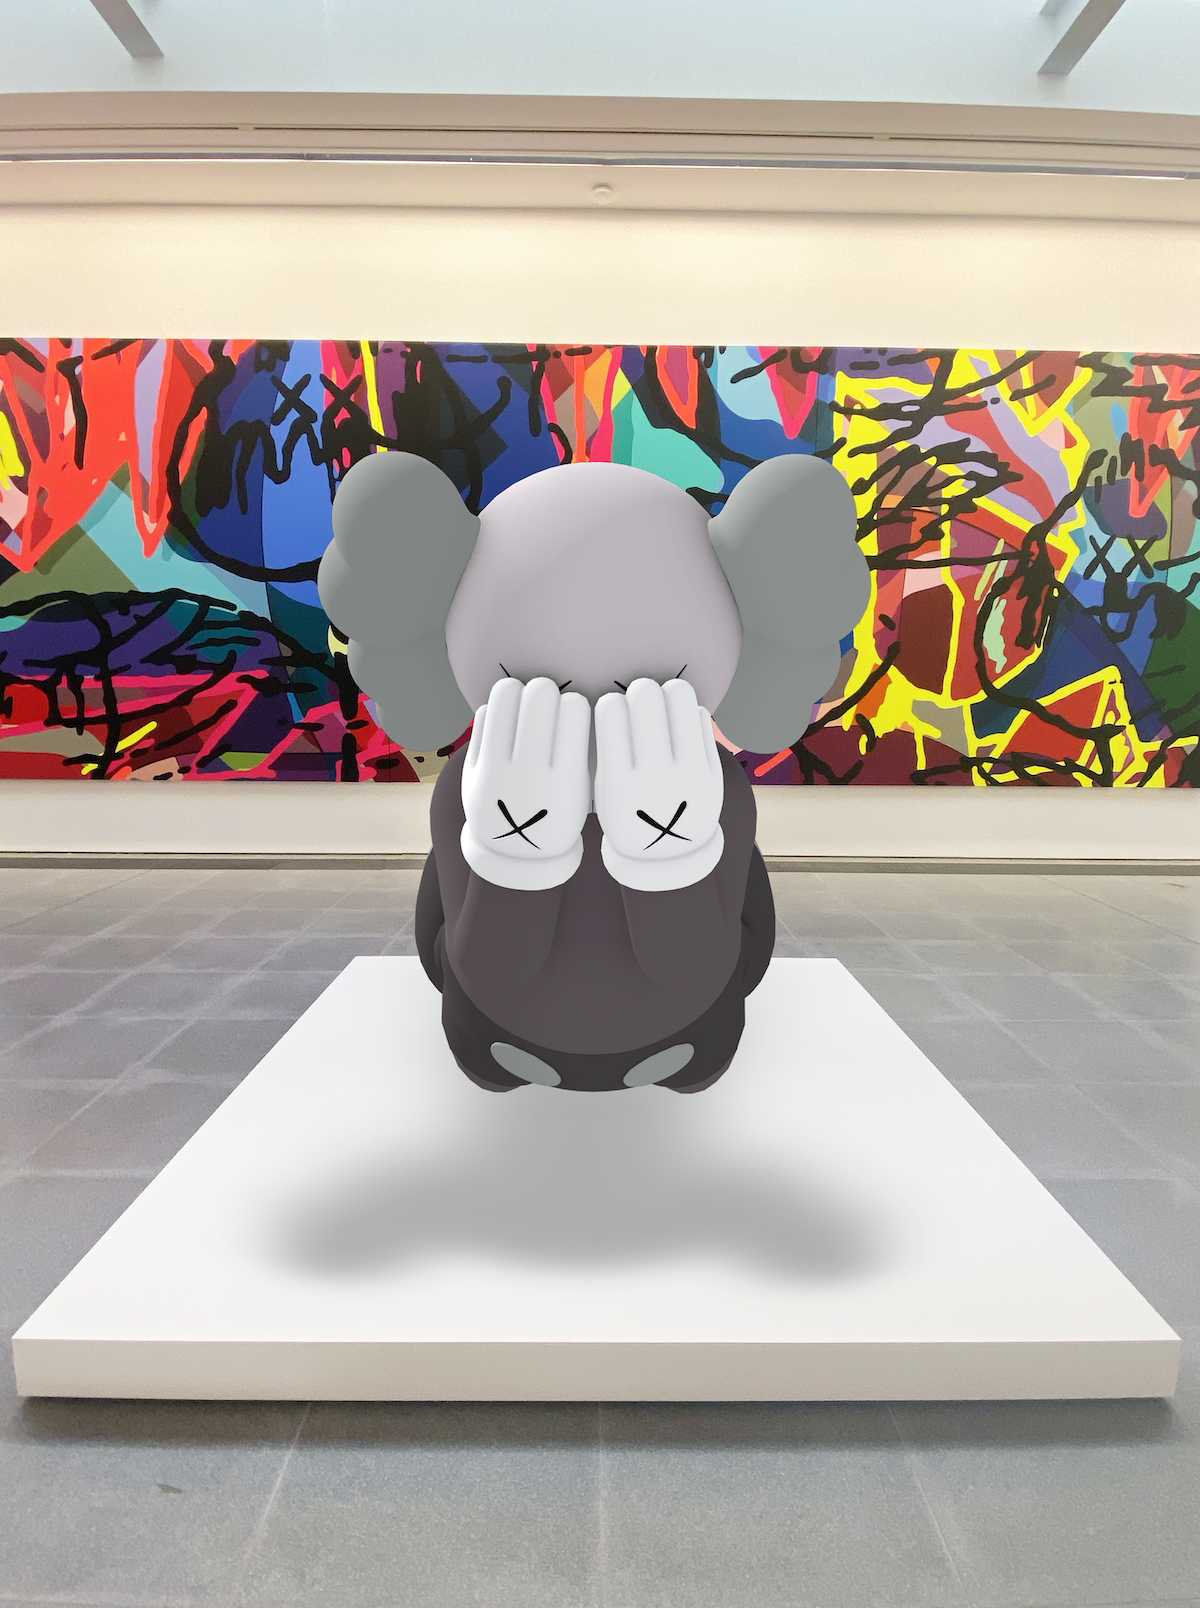 The Wick - KAWS, COMPANION (EXPANDED), 2020, augmented reality sculpture at Serpentine North Gallery. Courtesy of KAWS and Acute Art.